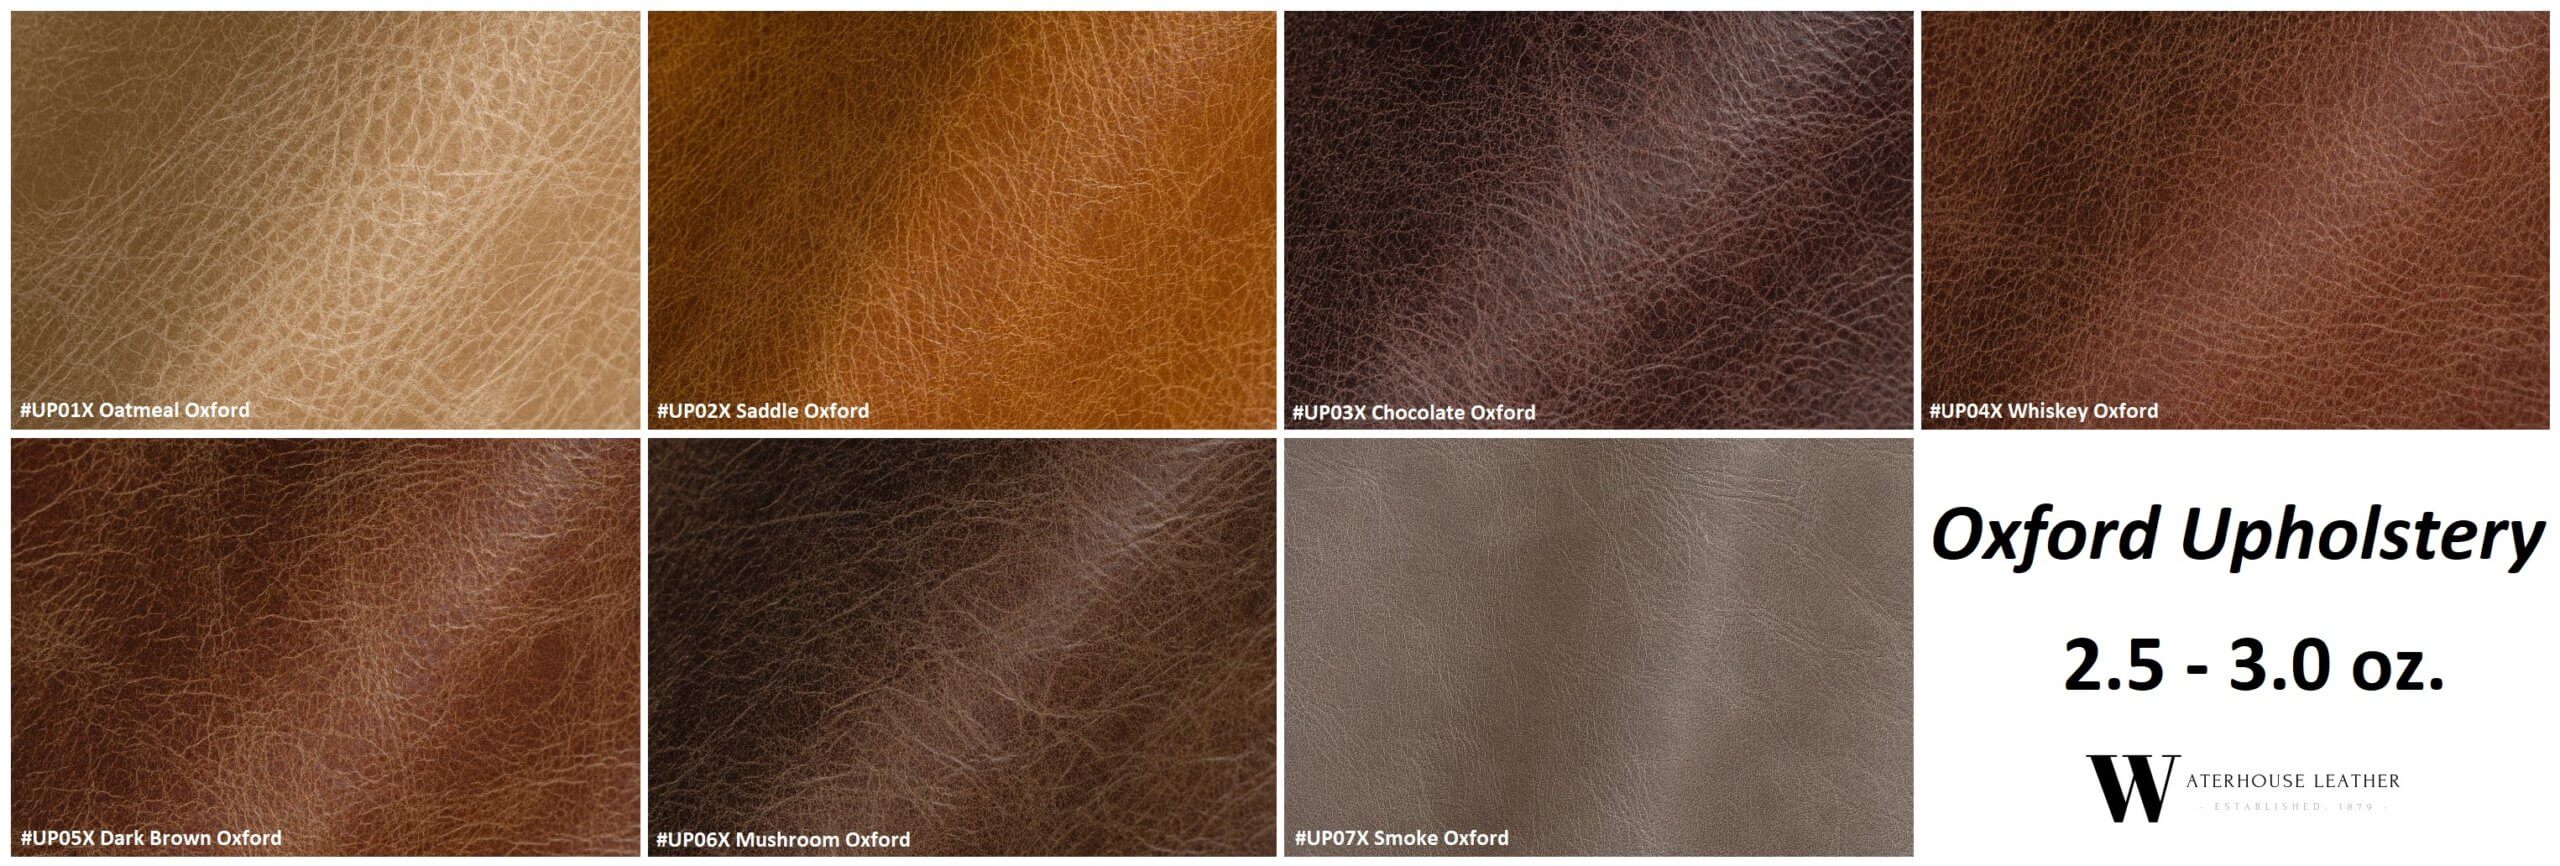 Oxford Upholstery Leather Waterhouse, Upholstering With Leather